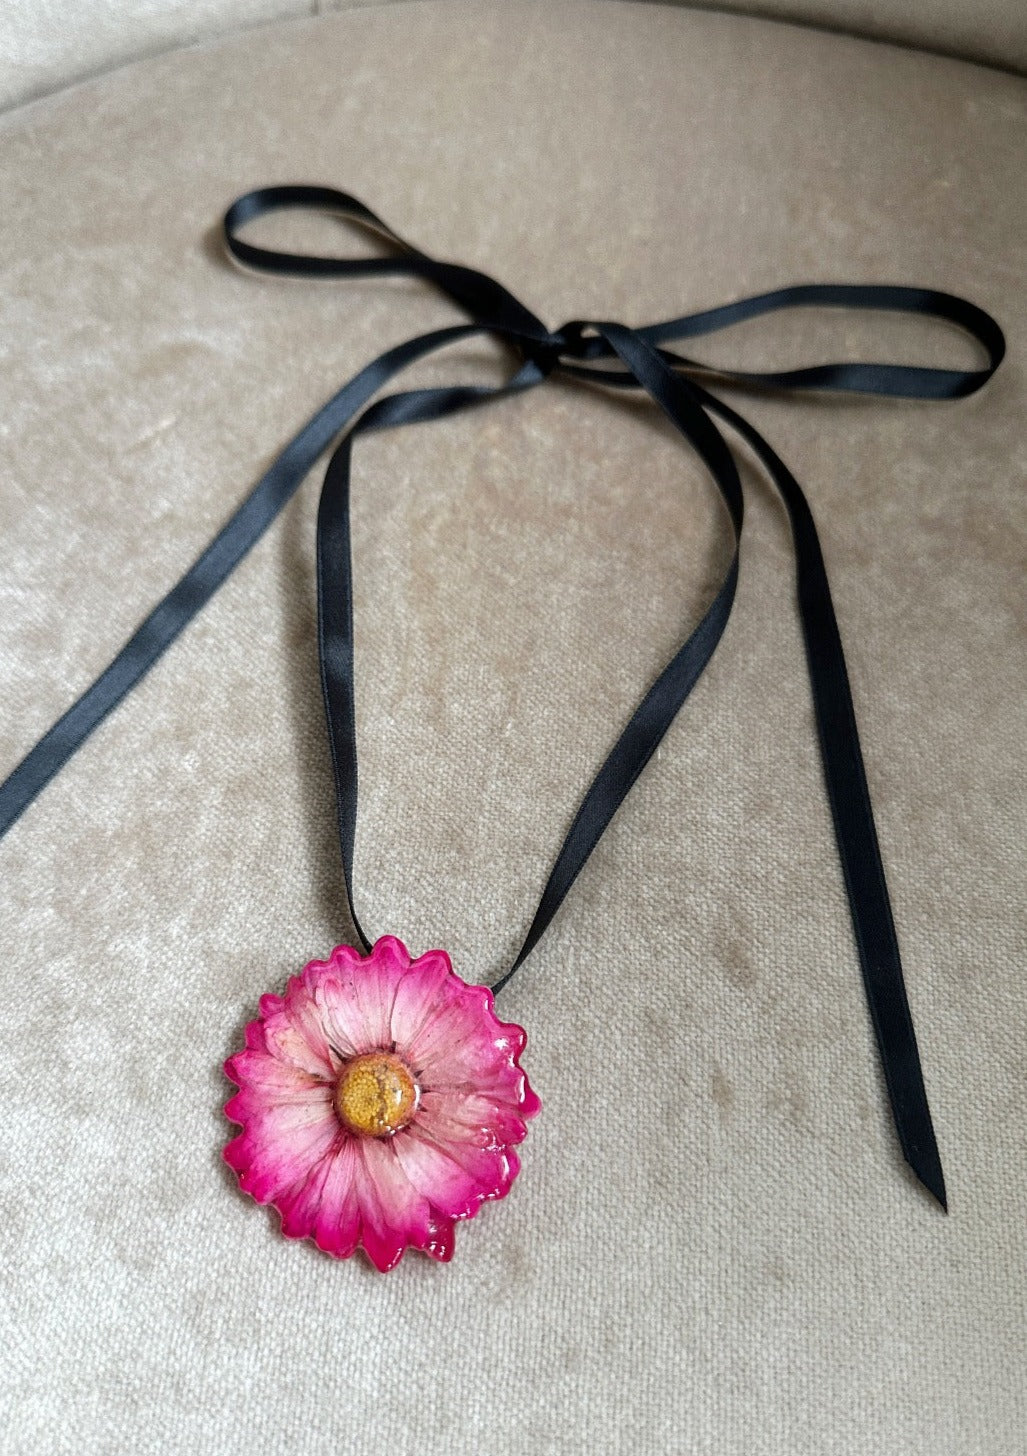 Pink daisy preserved in resin and suspended from a black satin ribbon.